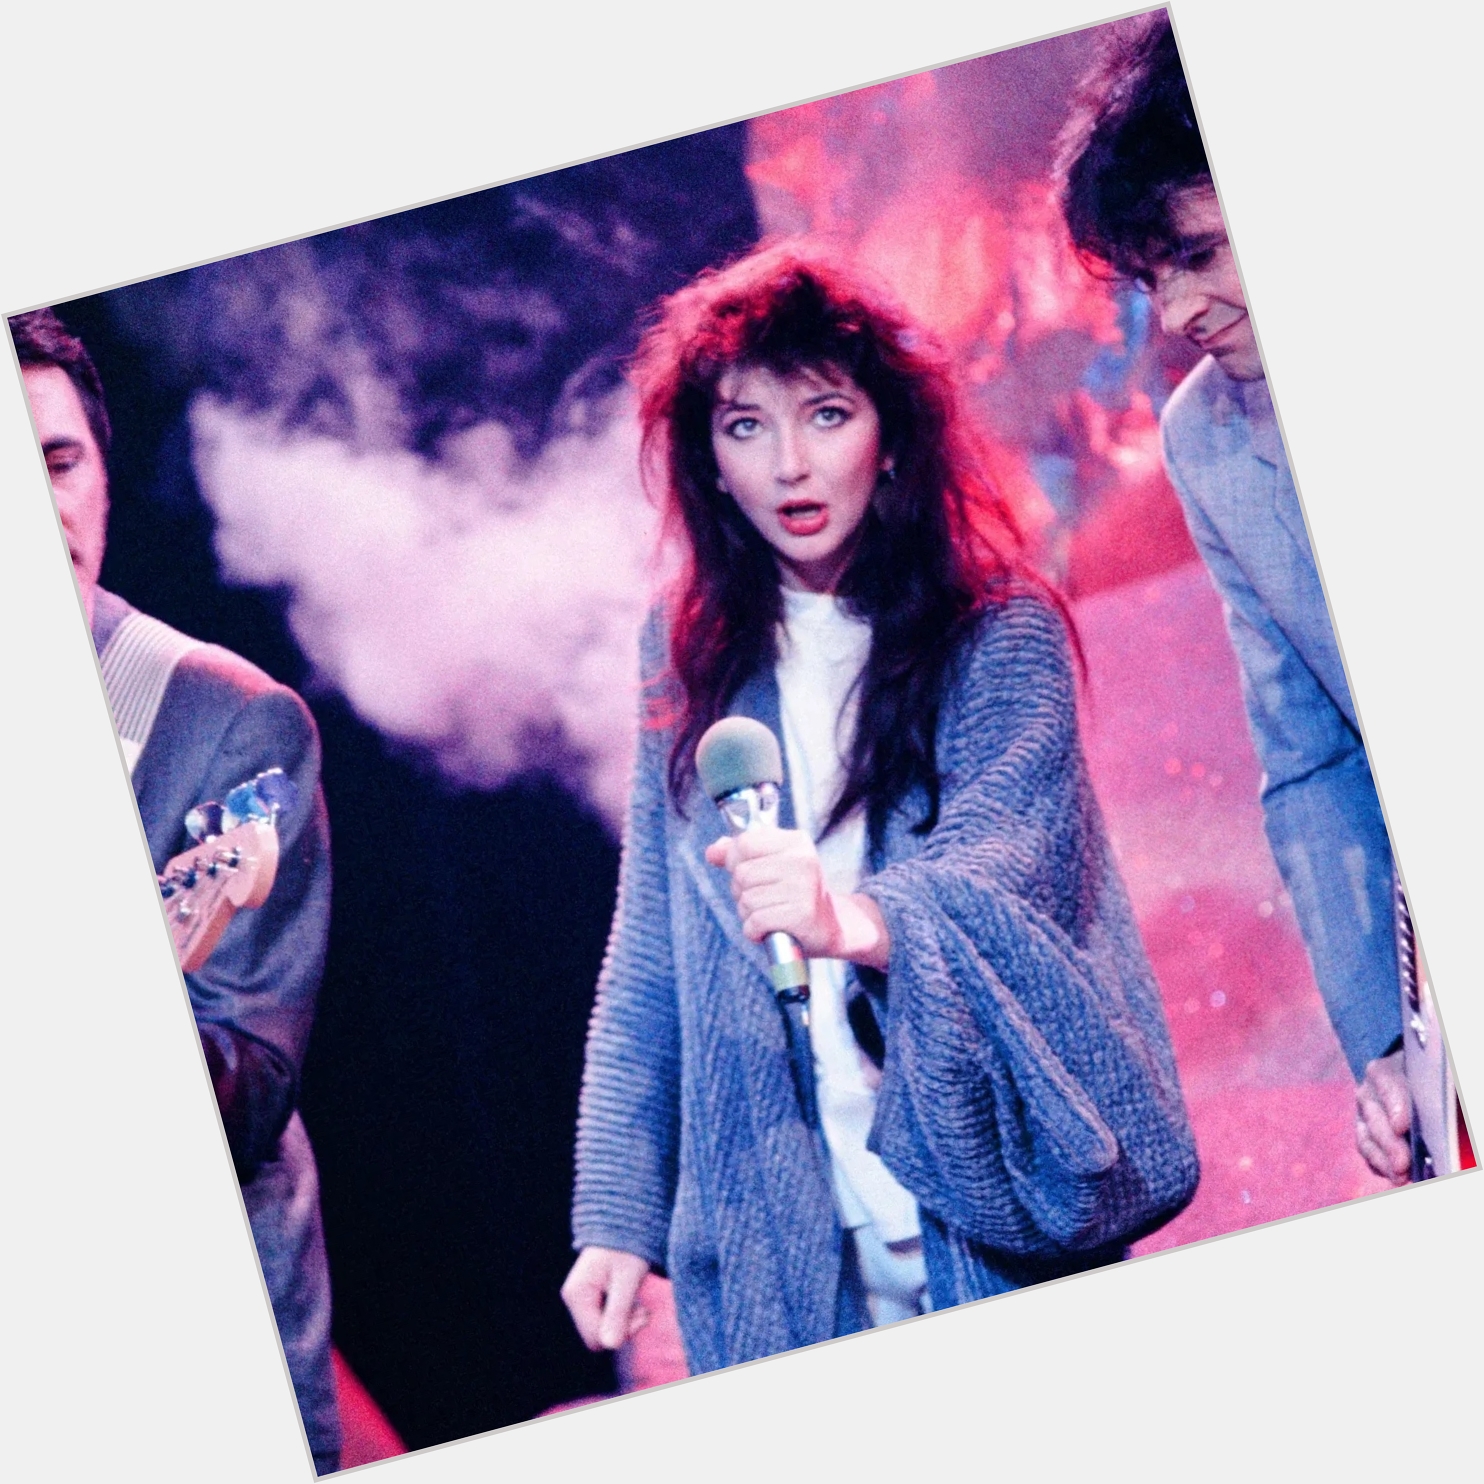 Happy Birthday Kate Bush! Celebrating the legend today and all days!! 